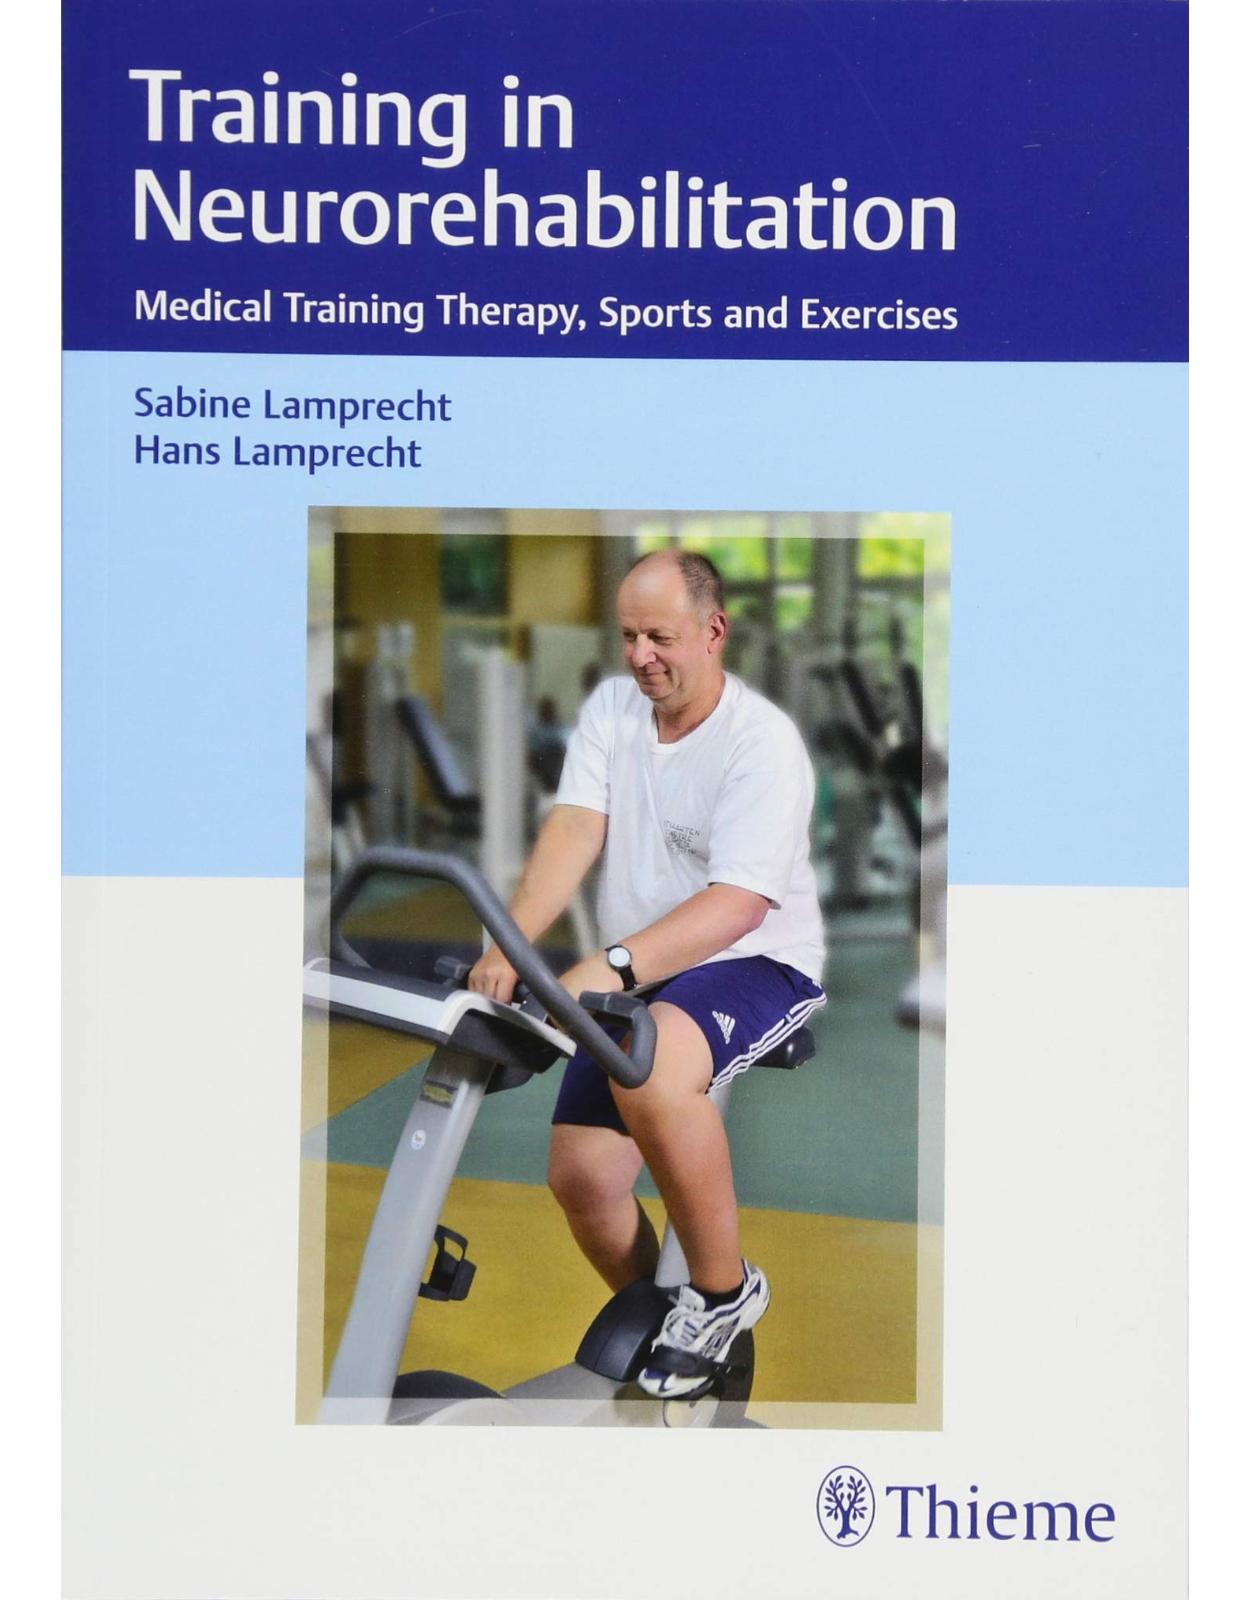 Training in Neurorehabilitation: Medical Training Therapy, Sports and Exercises